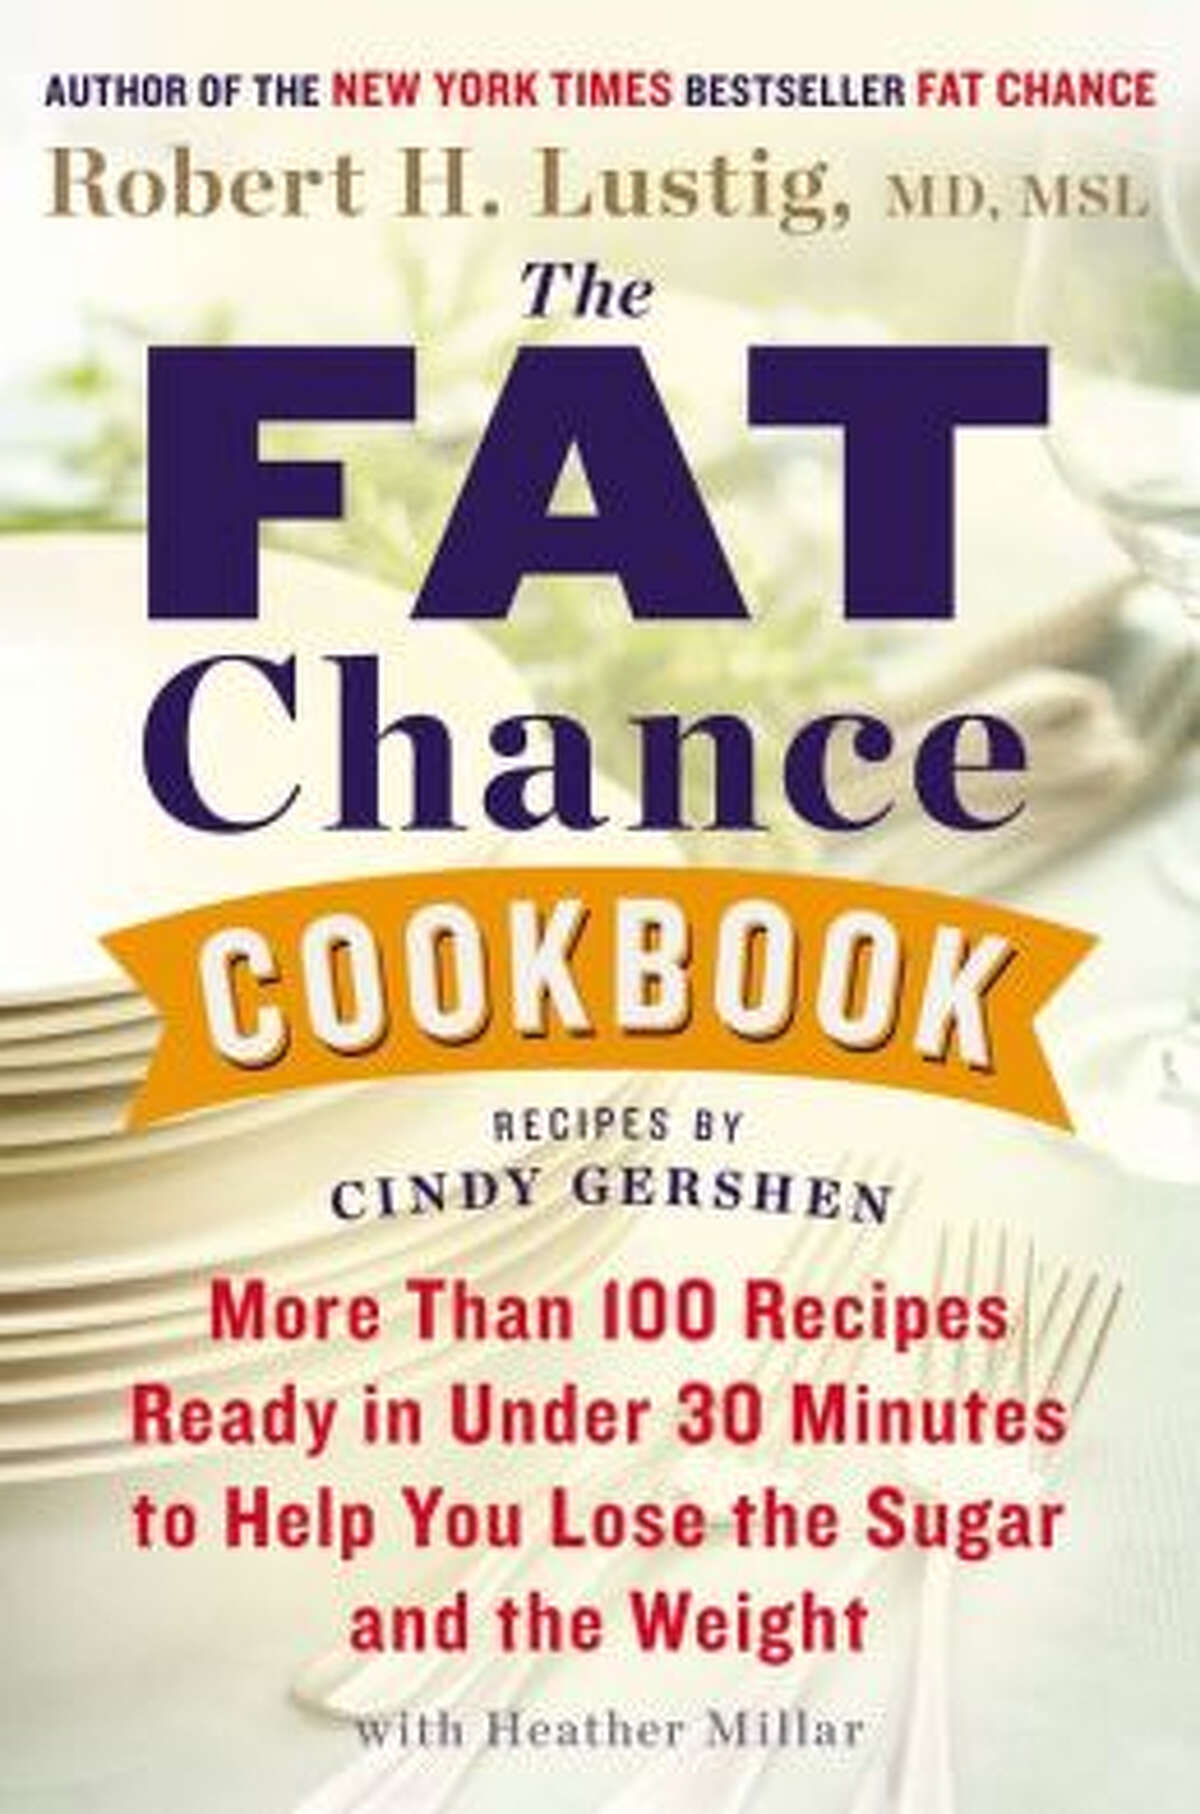 "The Fat Chance Cookbook: More Than 100 Recipes Ready in Under 30 Minutes to Help You Lose the Sugar and the Weight," by Dr. Robert H. Lustig, Cindy Gershen and Heather Millar